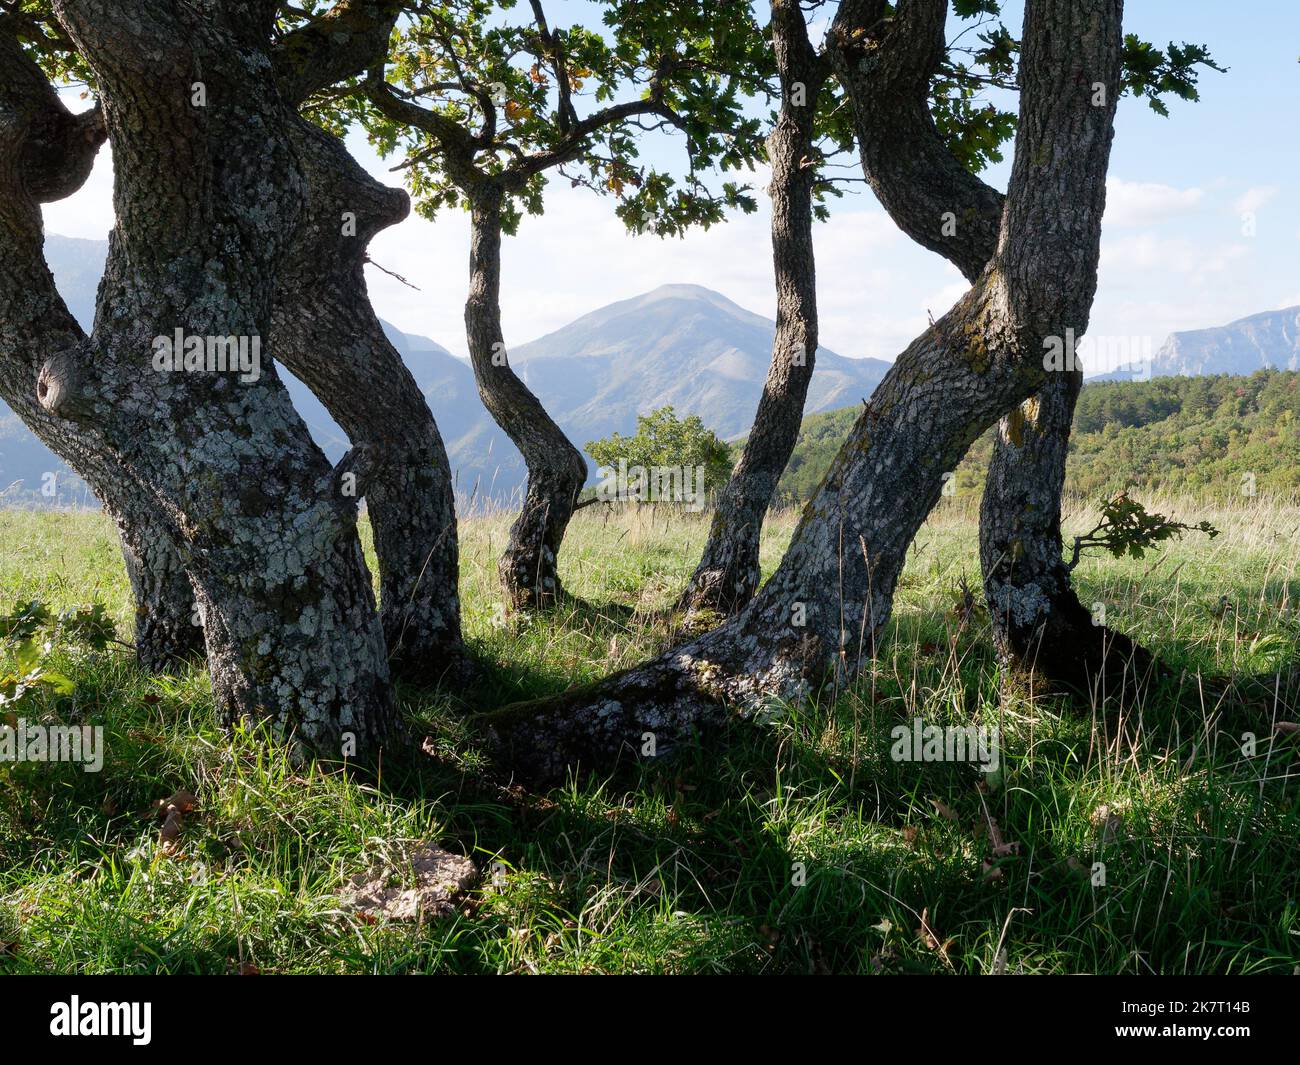 Unusual tree trunk shape with mountains behind in Miesola hilltop near the village of Coccore, Le Marche Region, Italy Stock Photo